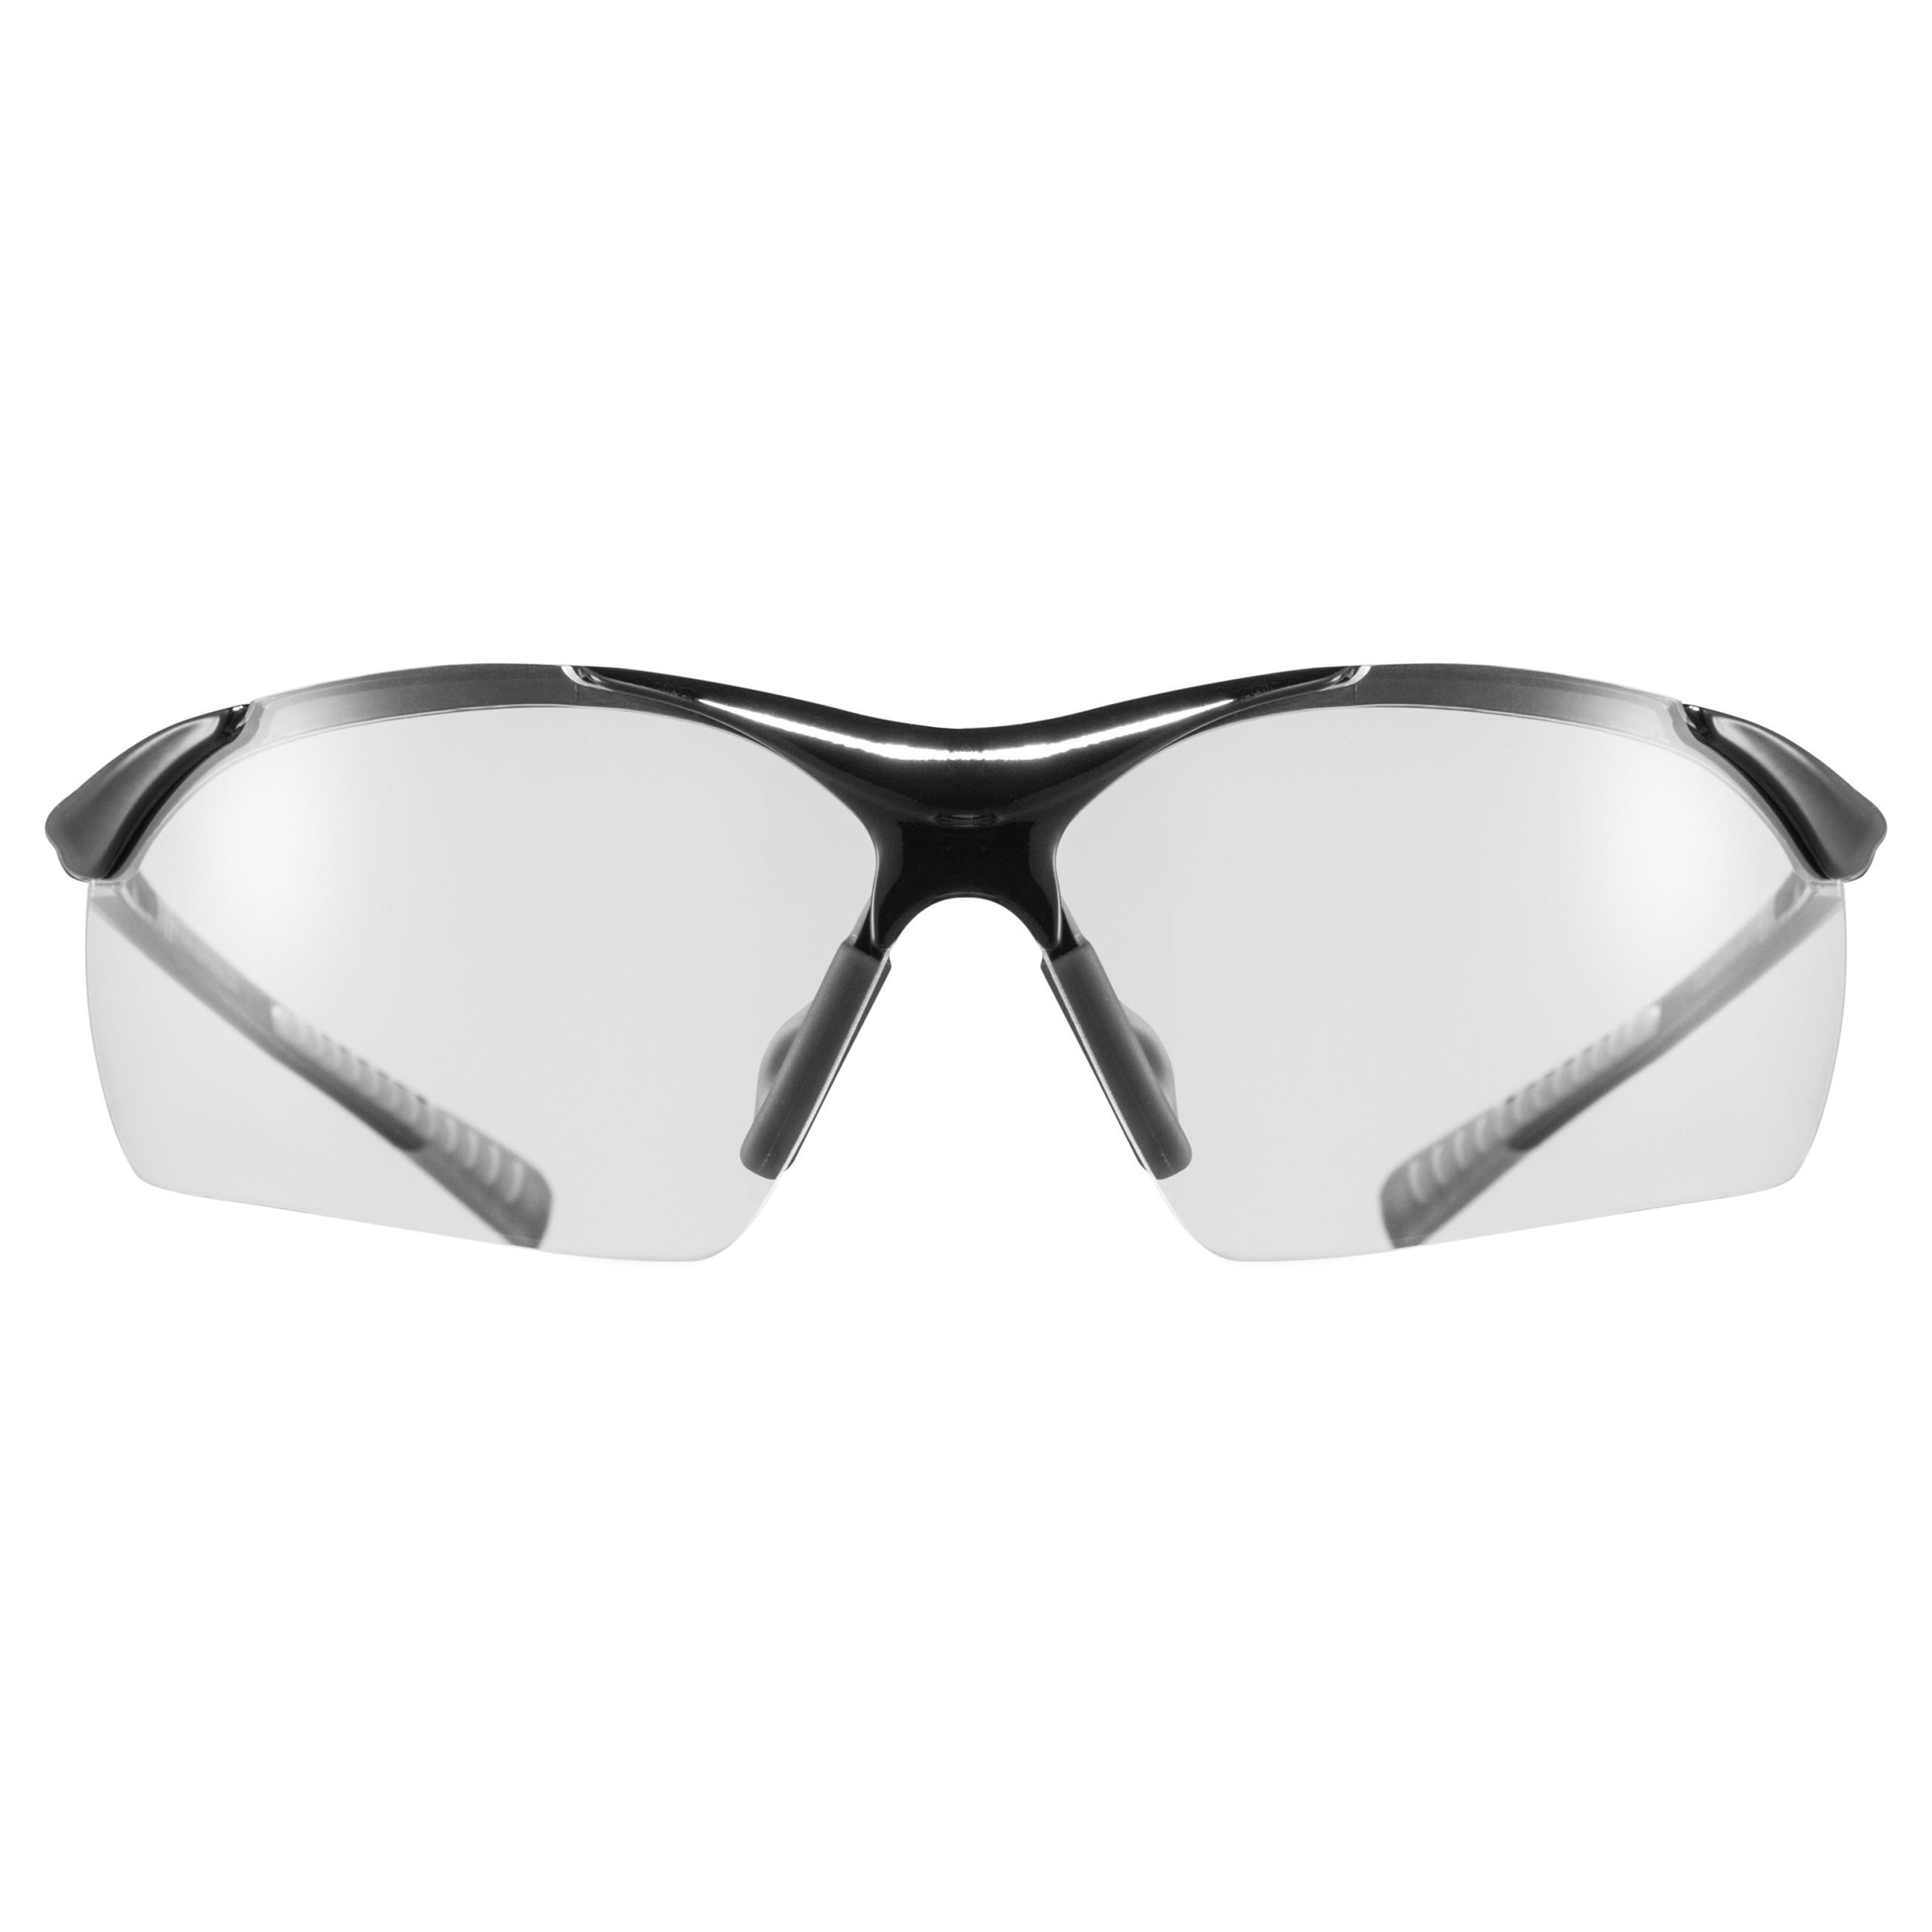 Uvex Sports Style 223 Black Grey Clear Glasses Bicycle Bike Cycling Sports Glasses